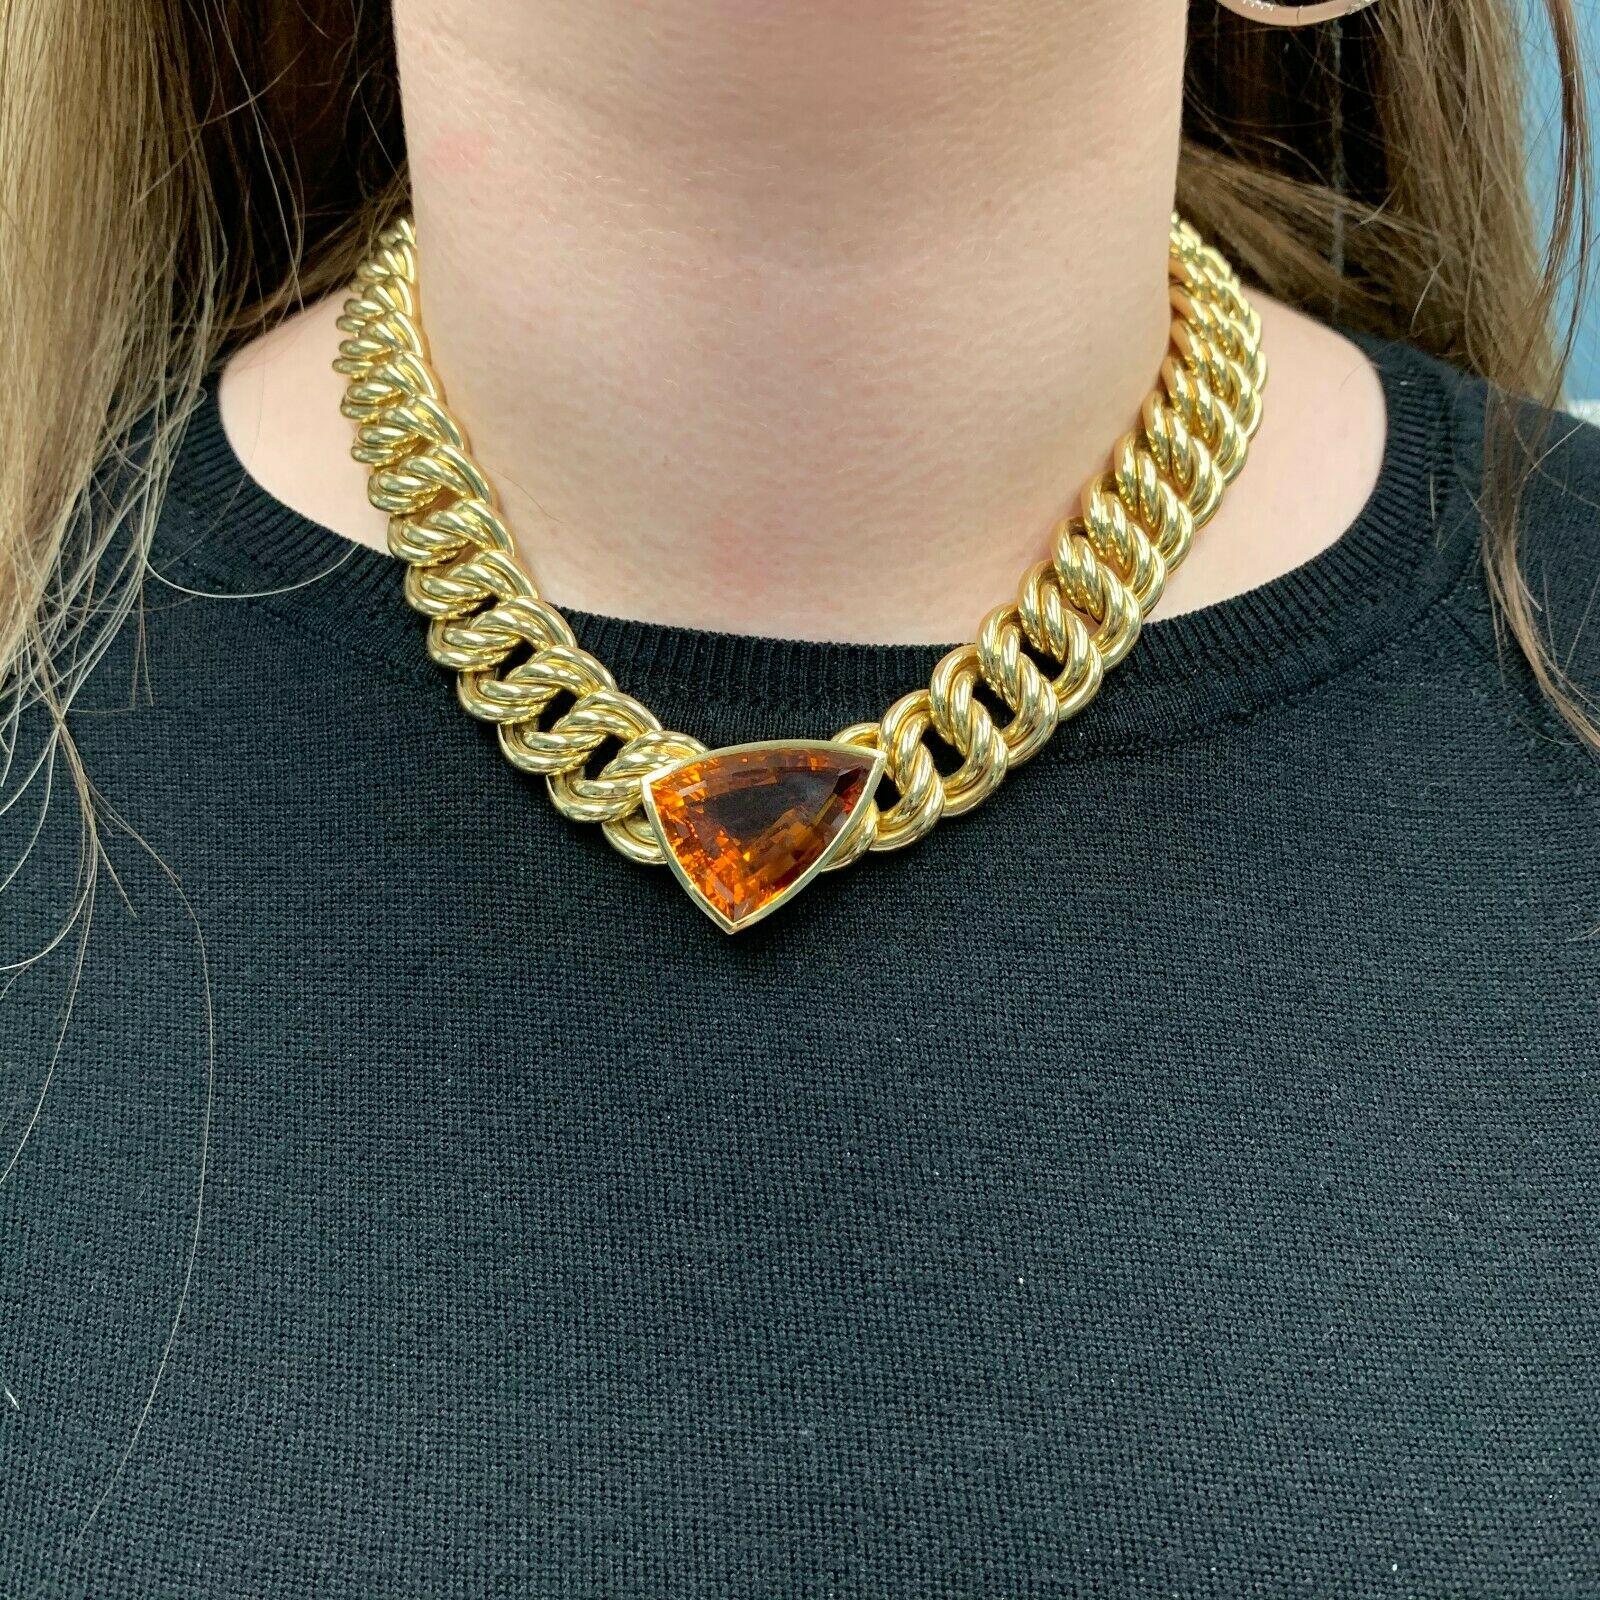 The necklace is 18 inches in length, made of 18K yellow gold, and weighs 90.90 DWT (approx. 141.37 grams). It also has one trillion cut citrine. Circa 1987